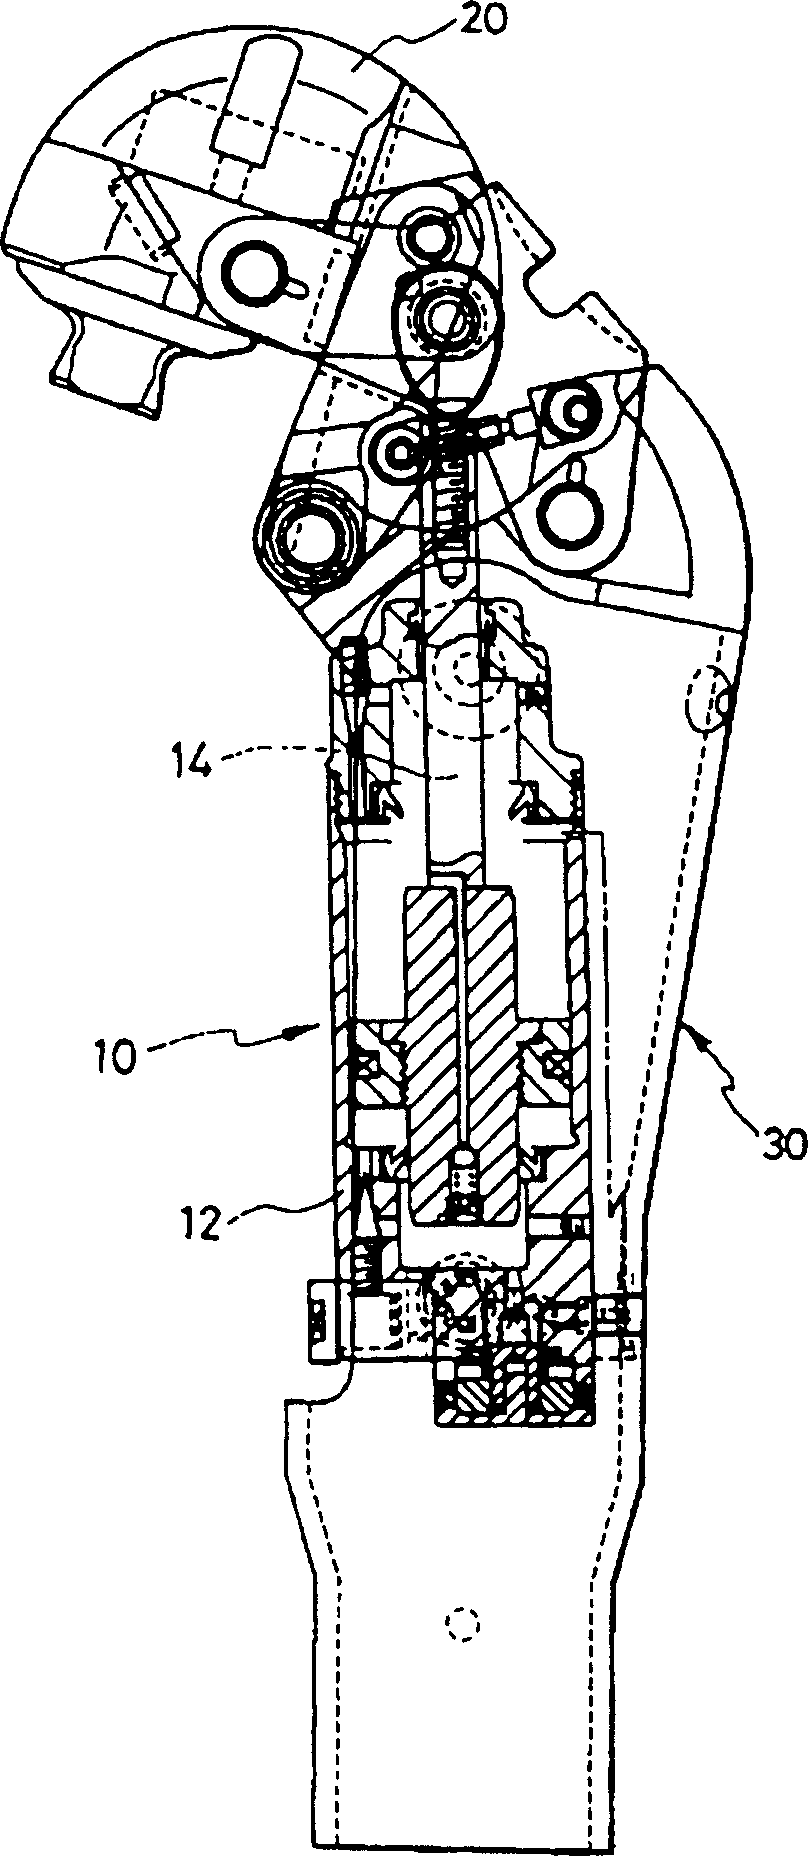 Air cylinder device for artificial limb